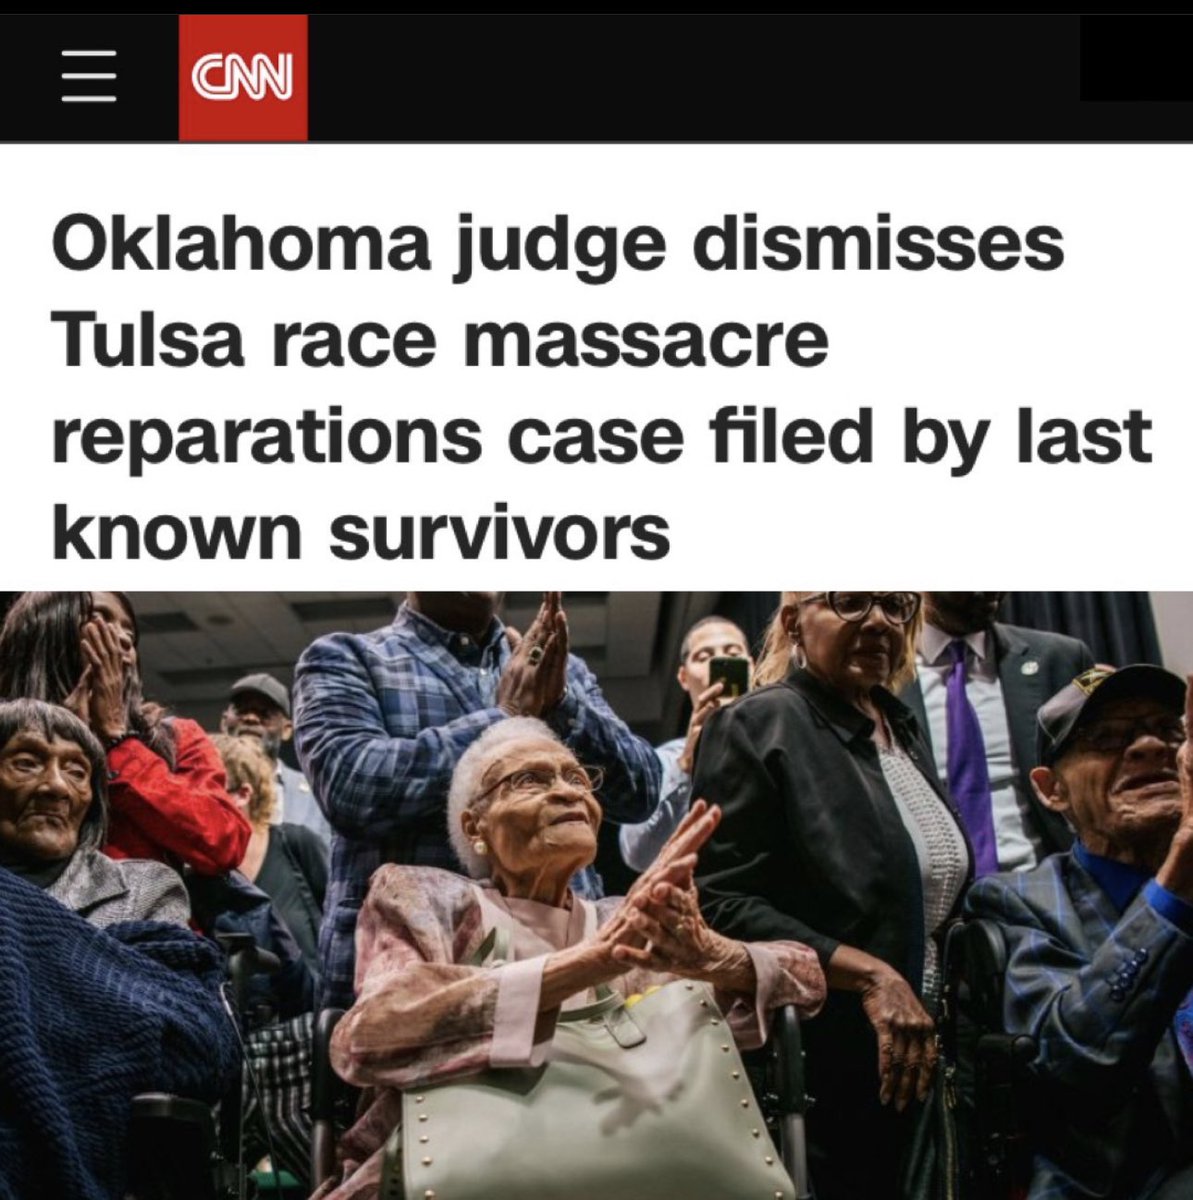 An Oklahoma judge dismissed the reparations lawsuit filed by Lessie Benningfield Randle, 108, Viola Fletcher, 109, and her brother, Hughes Van Ellis, 102, the last three known survivors of the Tulsa race massacre.

America has $70 Billion for Ukrainians in conflict with Russians